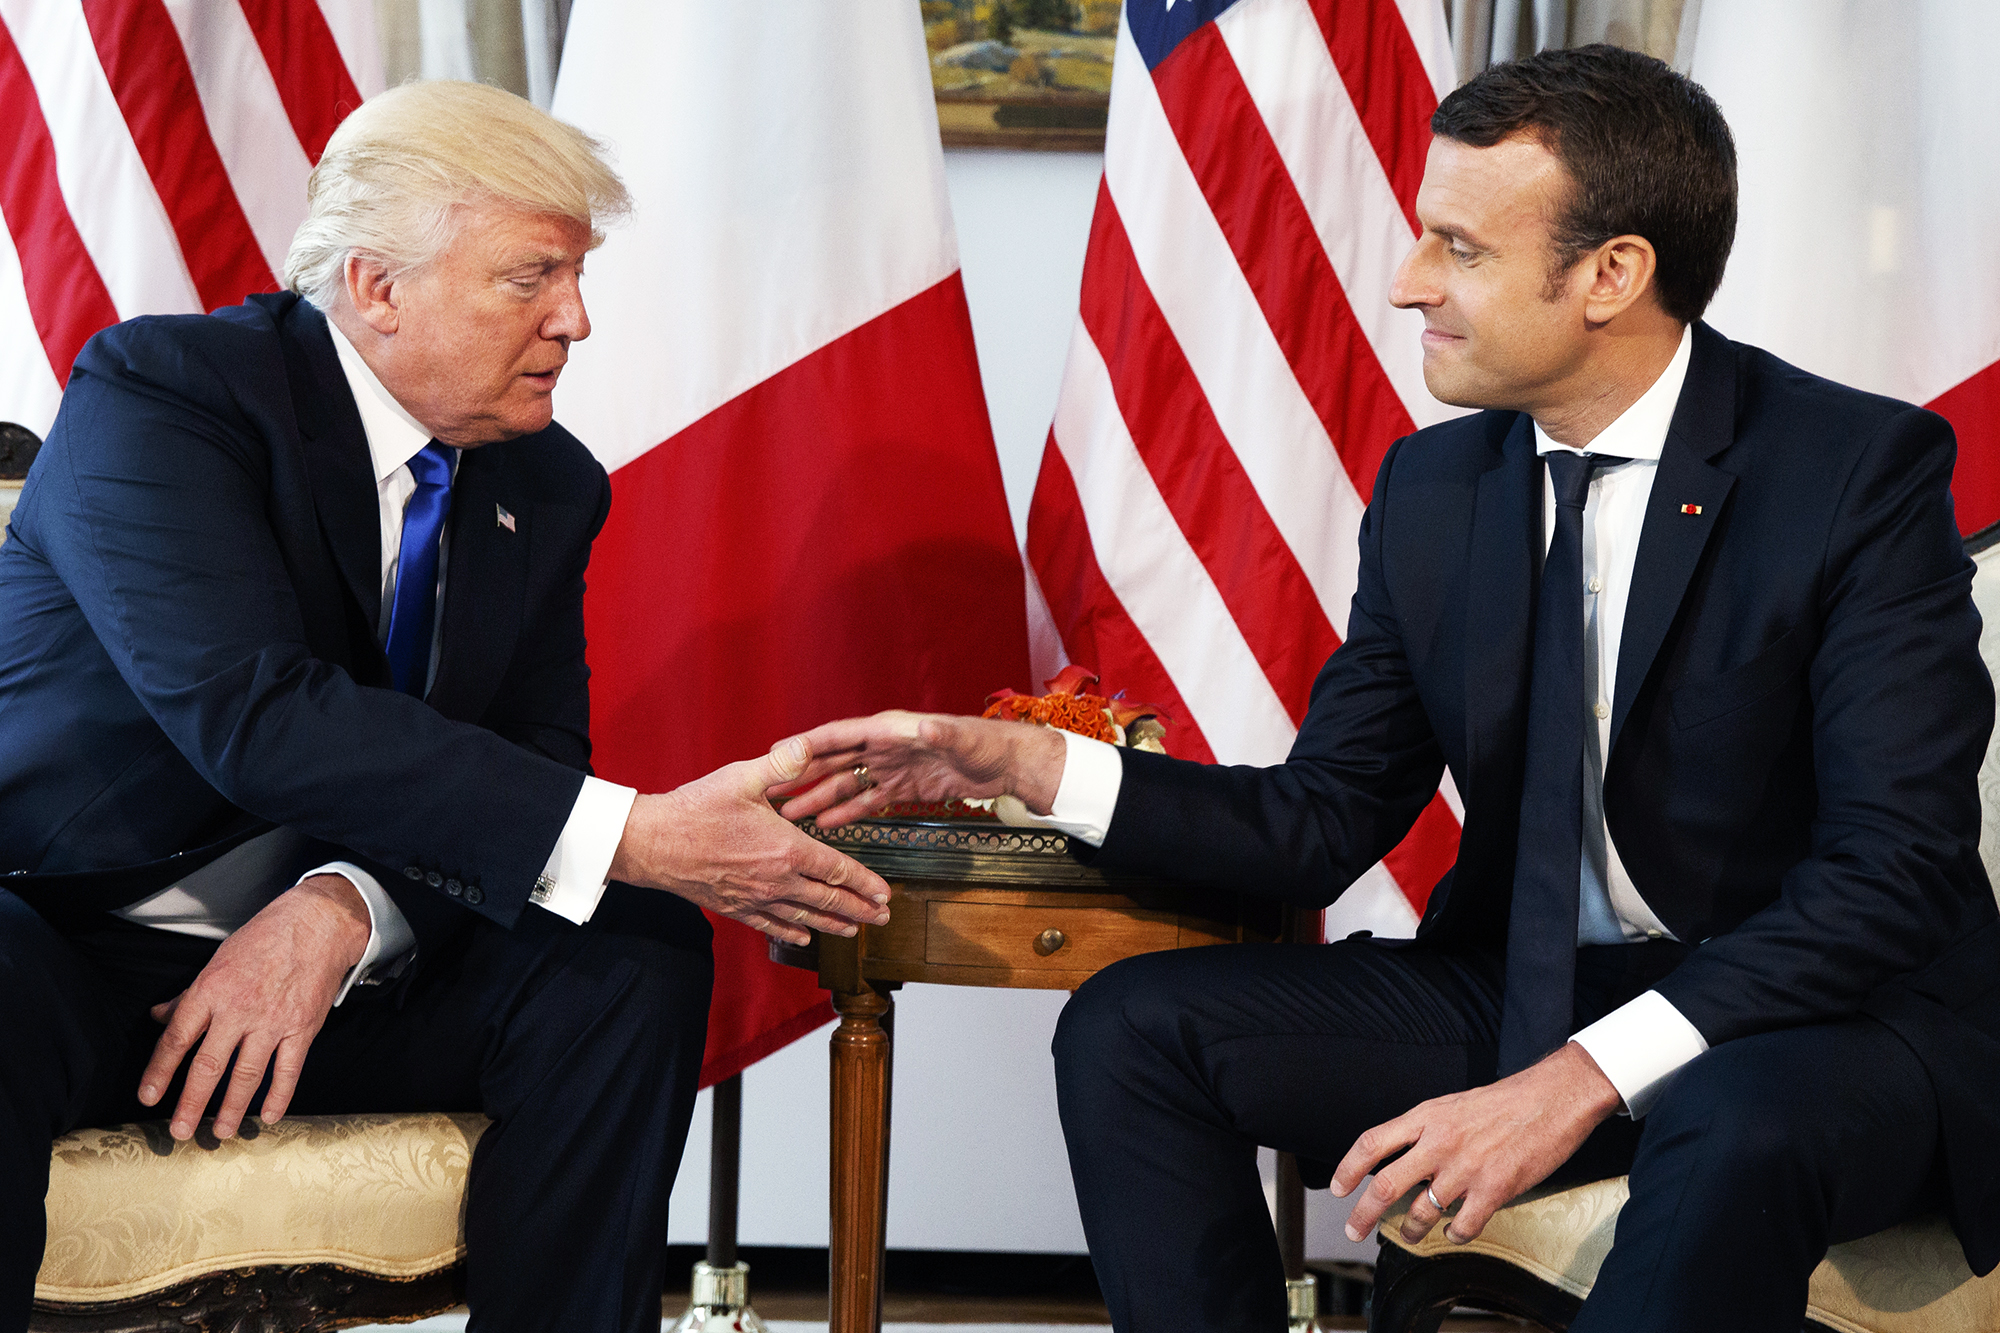 French President Emmanuel Macron gives Donald Trump a  white-knuckle  handshake in Brussels, on May 25, 2017.